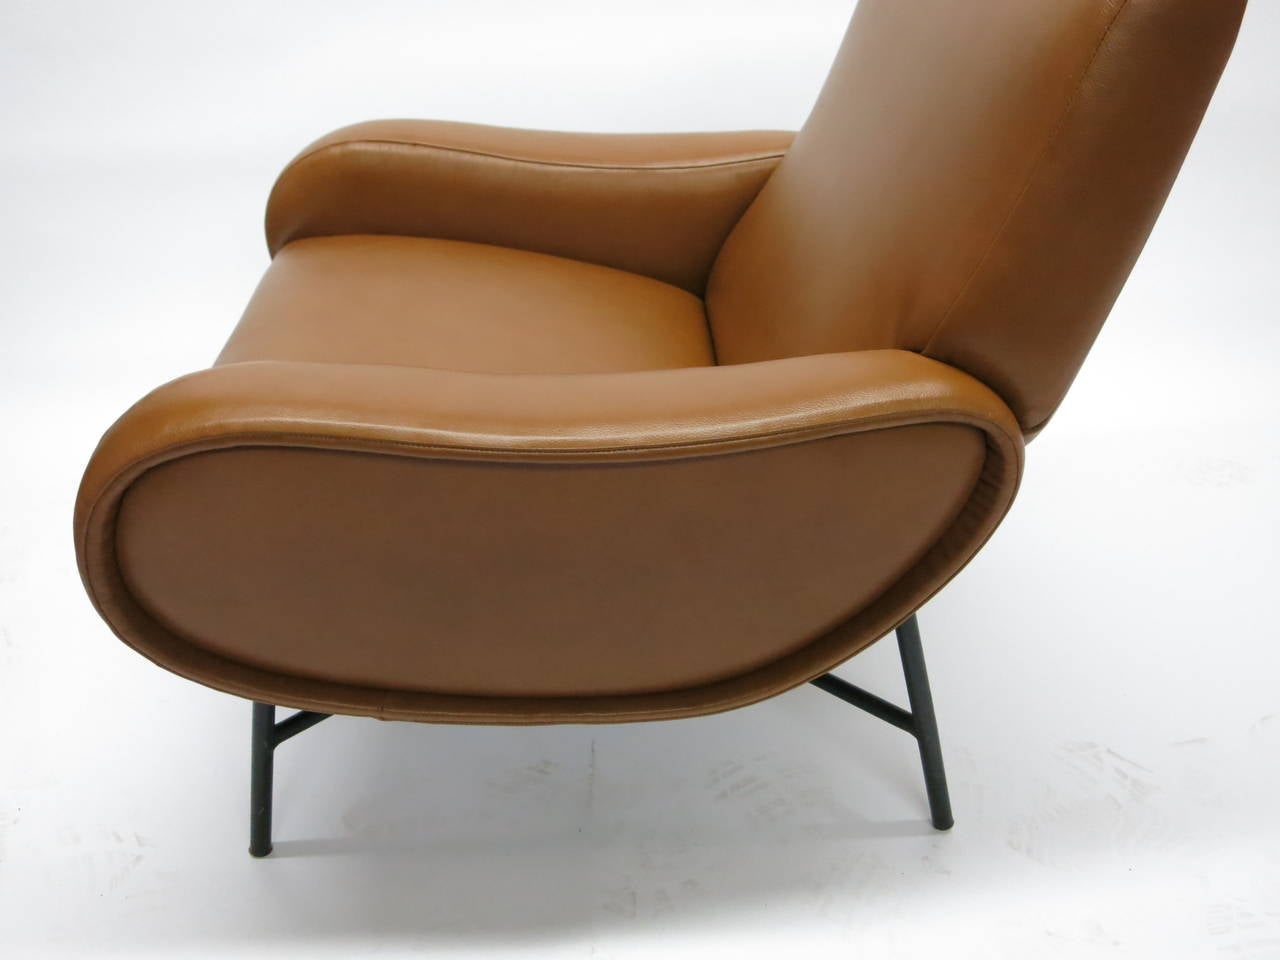 Mid-20th Century Lounge Chair circa 1950, Made in Italy